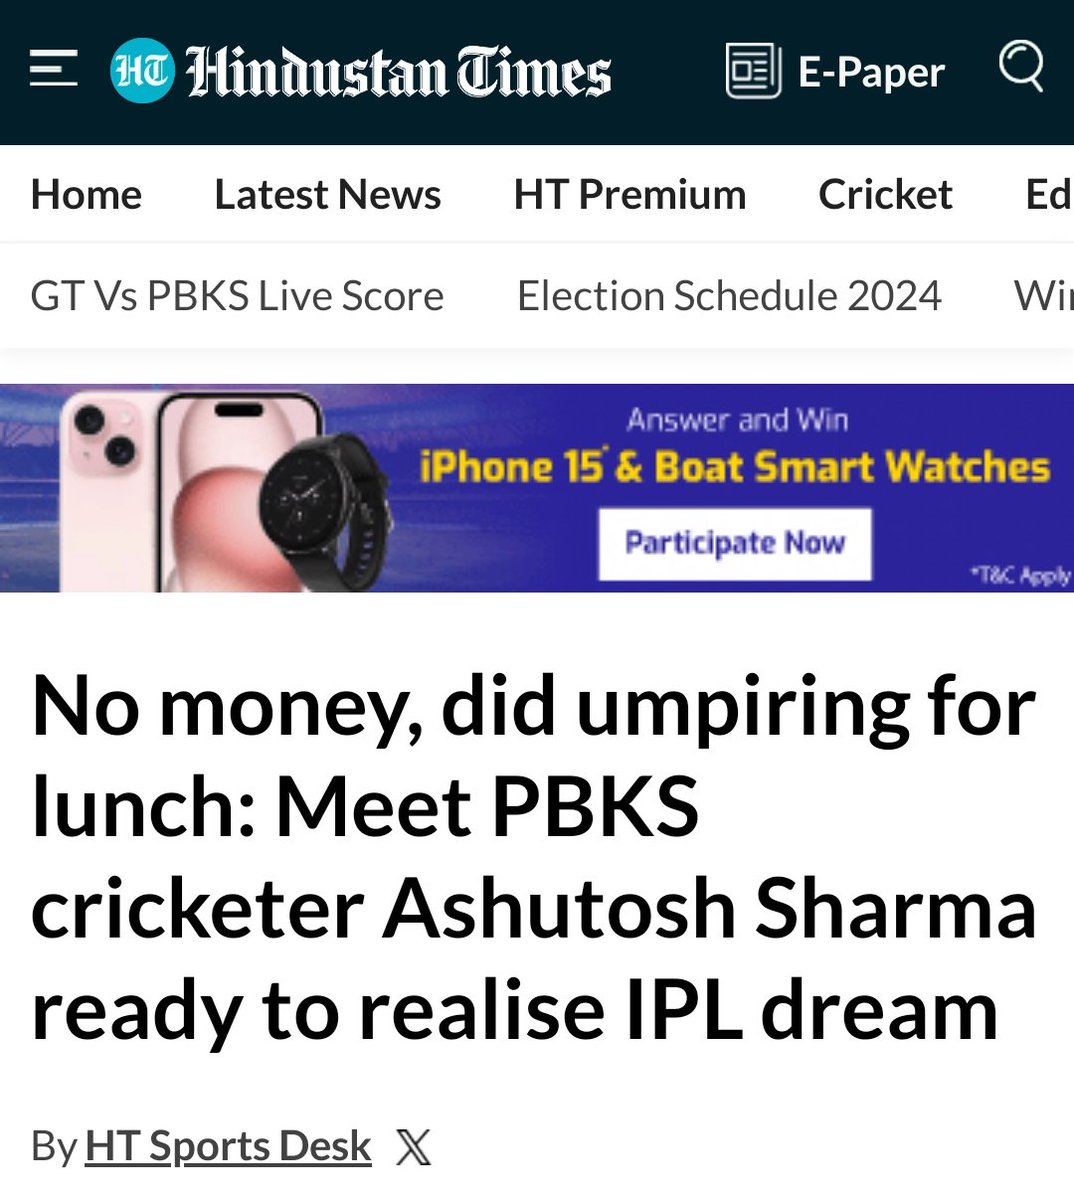 The journey of Ashutosh Sharma, the newest IPL sensation who made a heroic 31 off 17 on his IPL debut for PBKS is fascinating! 'When I left home, I did not have enough money. I used to go to a camp and I started umpiring in matches to afford lunch.' Played! Champ 🫡 #GTvsPBKS